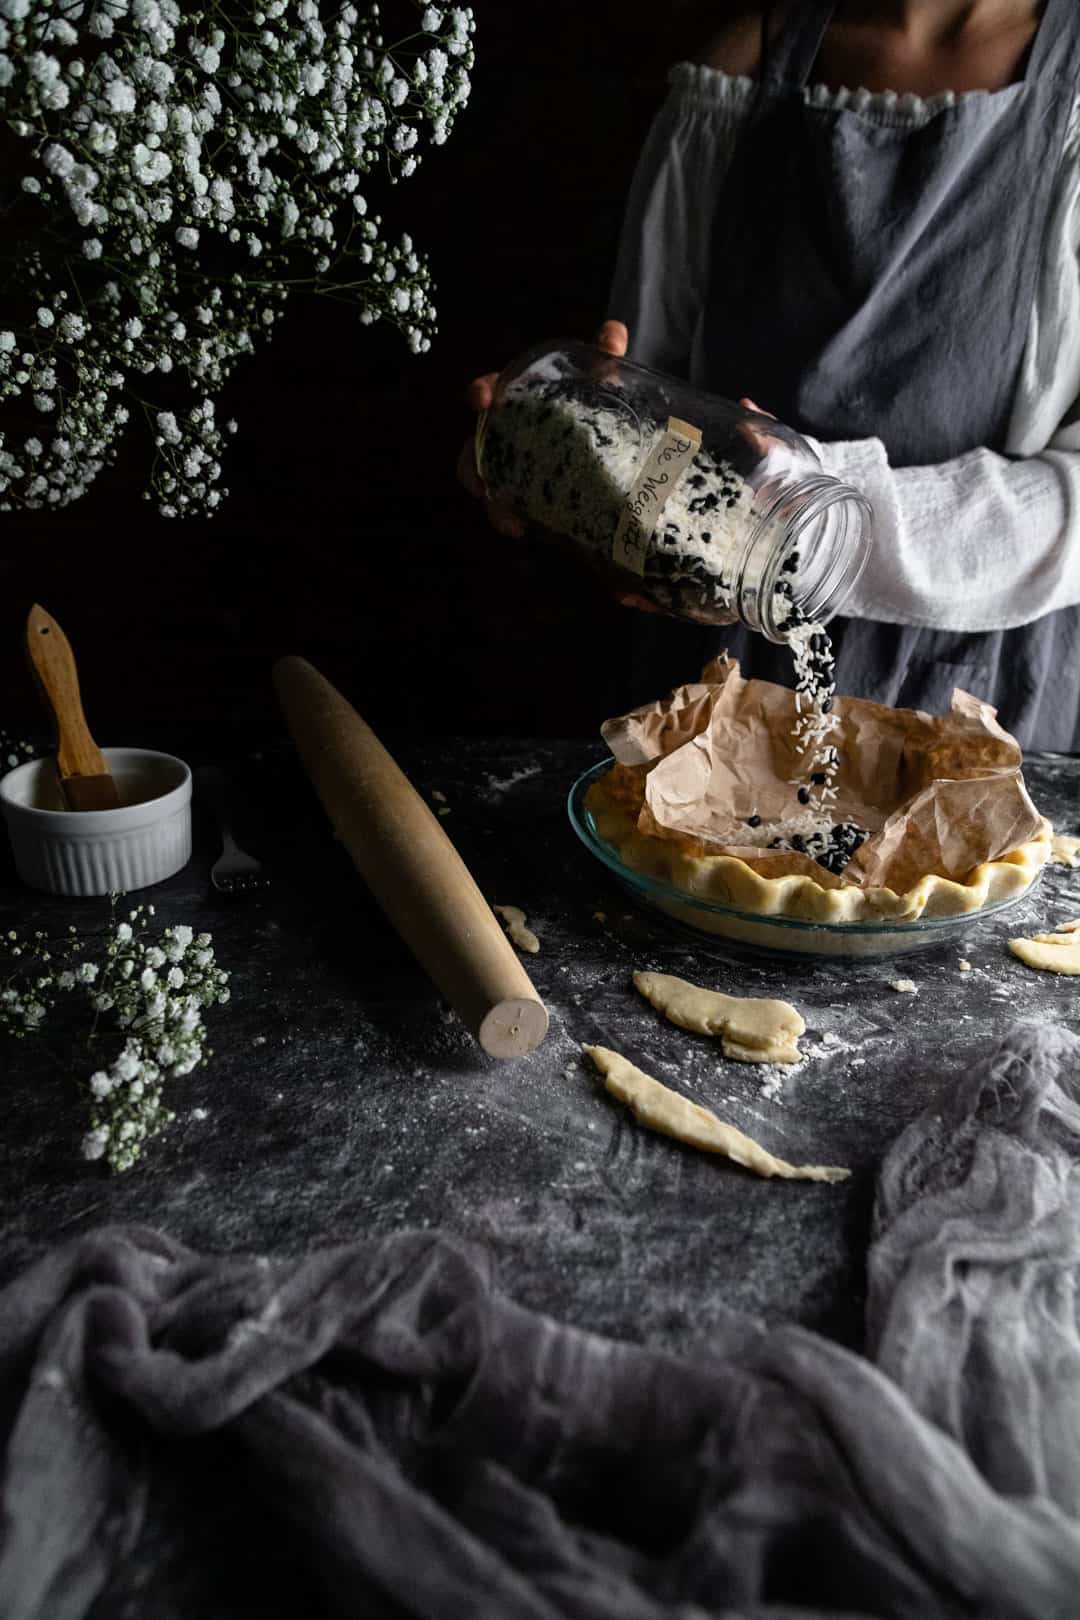 A woman pouring dried rice and beans from a jar into the coffee-filter lined unbaked pie crust. She is preparing the pie crust for blind baking.